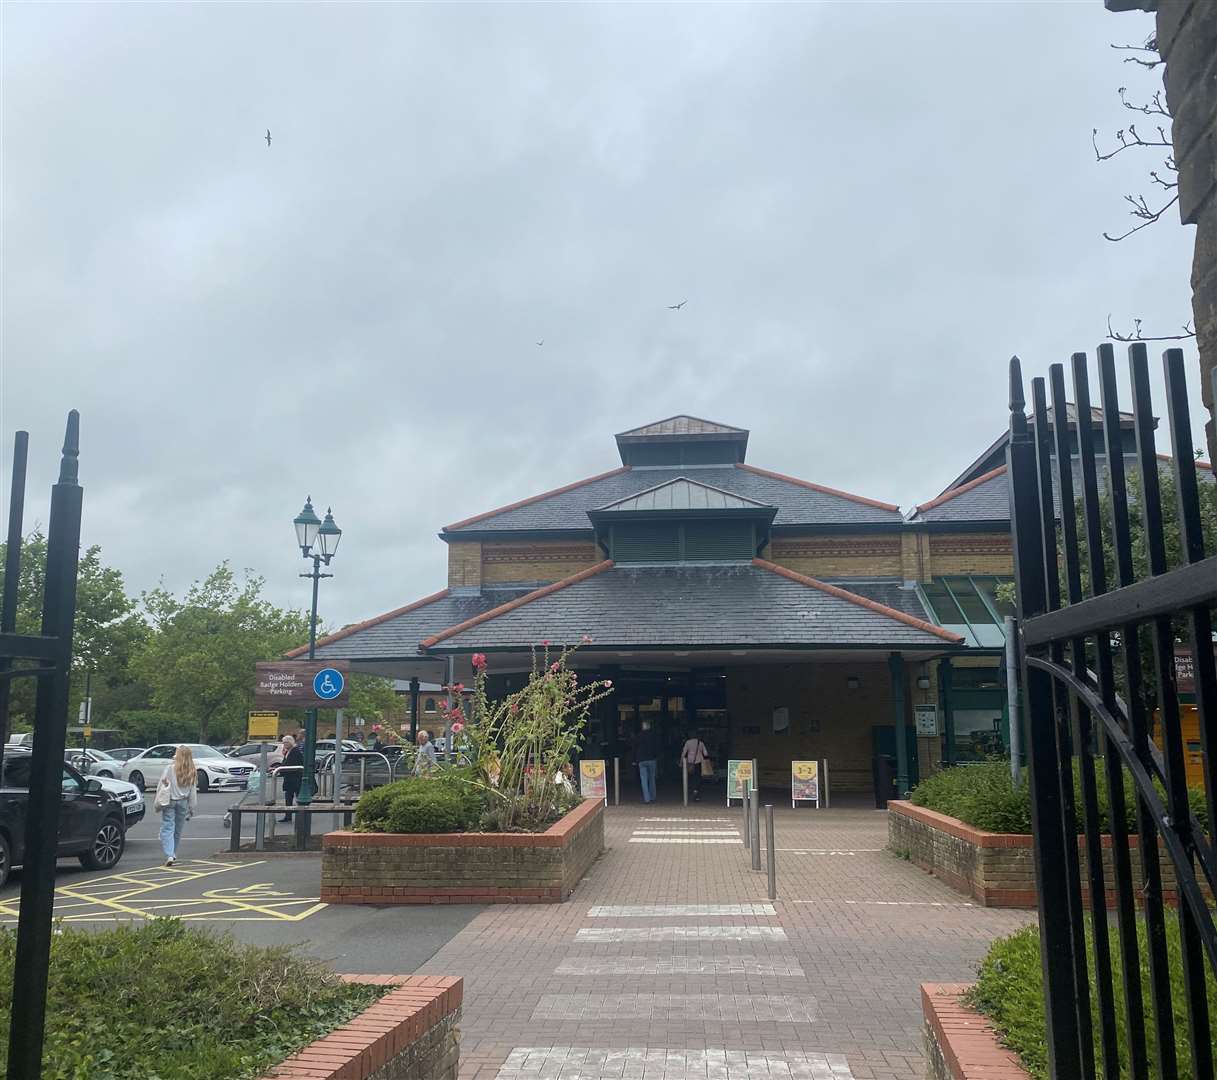 Issues with the sustainability of the performance at the Morrisons in North Lane, Faversham, have led to its closure